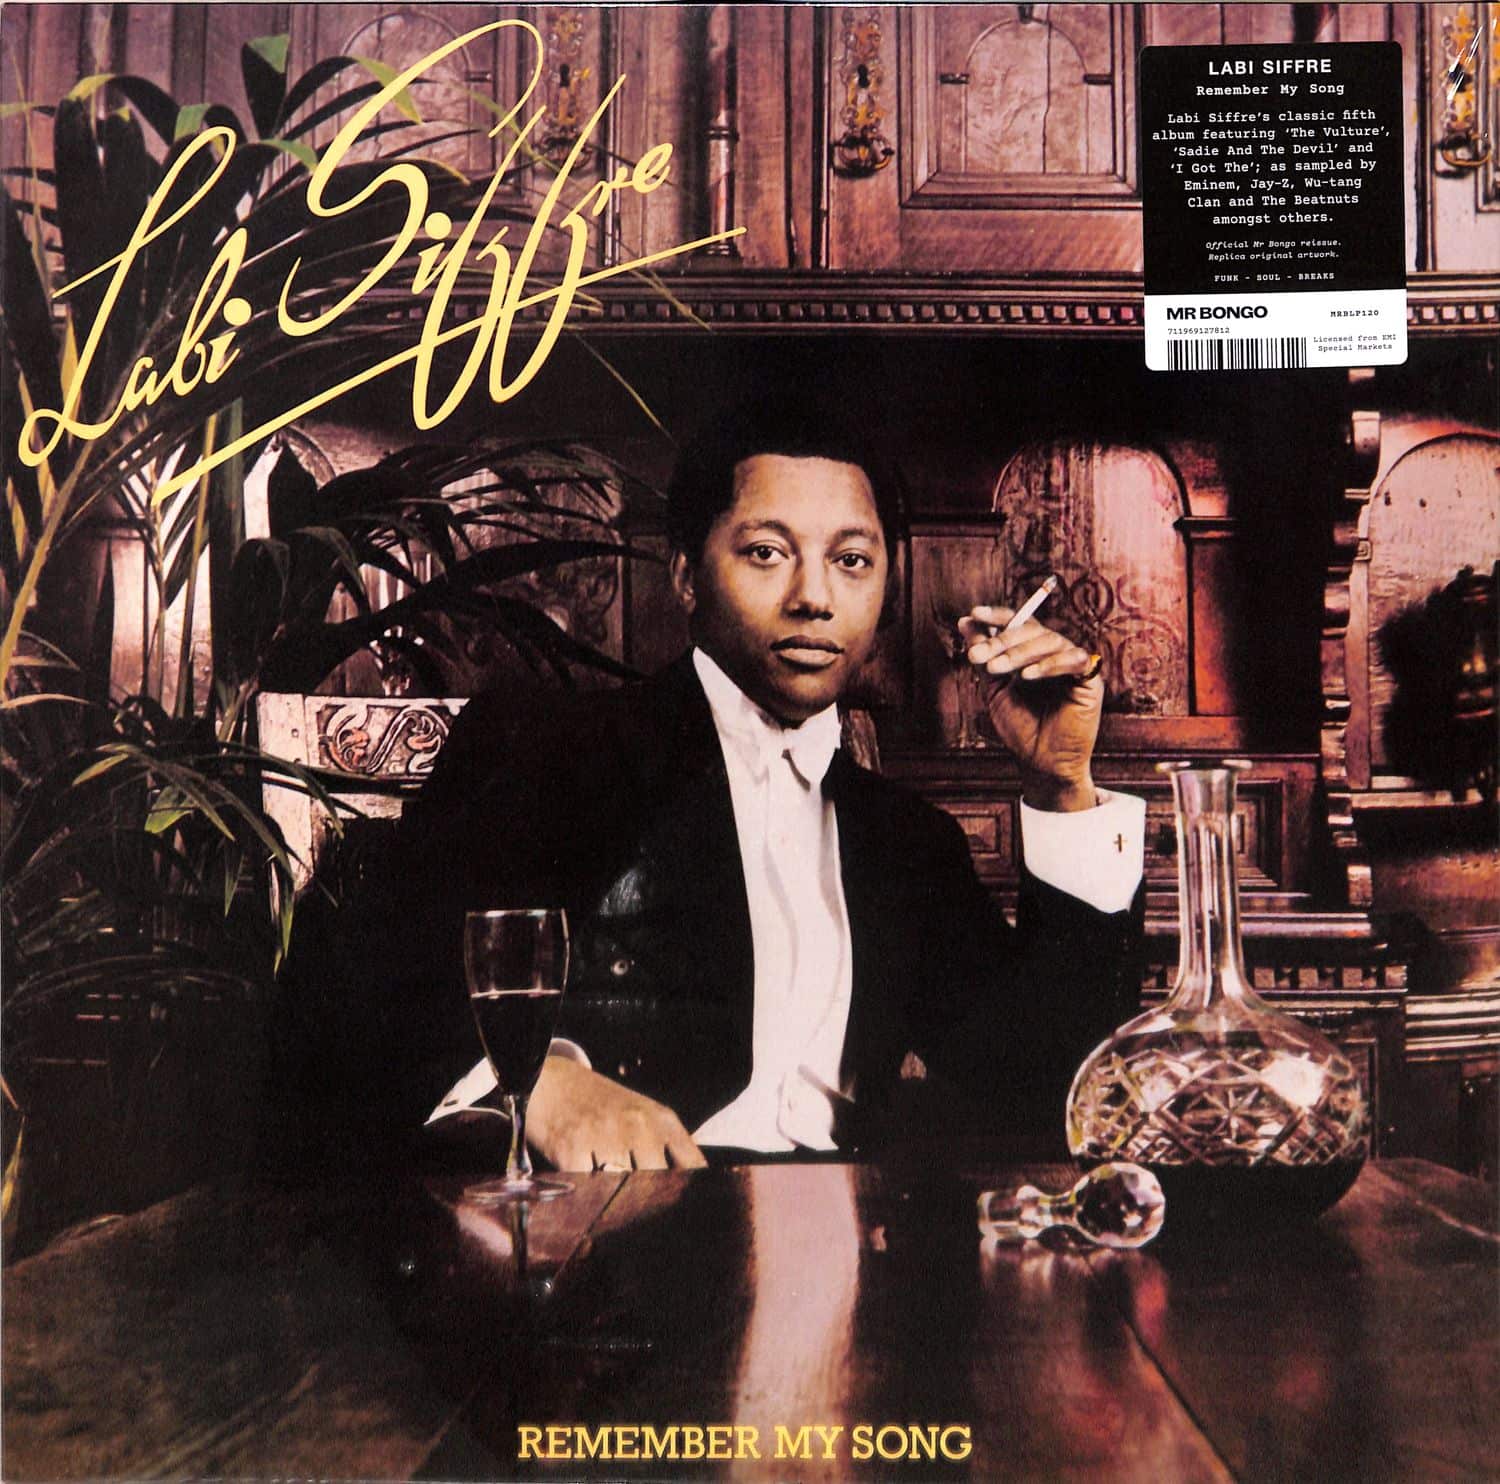 Labi Siffre - REMEMBER MY SONG 